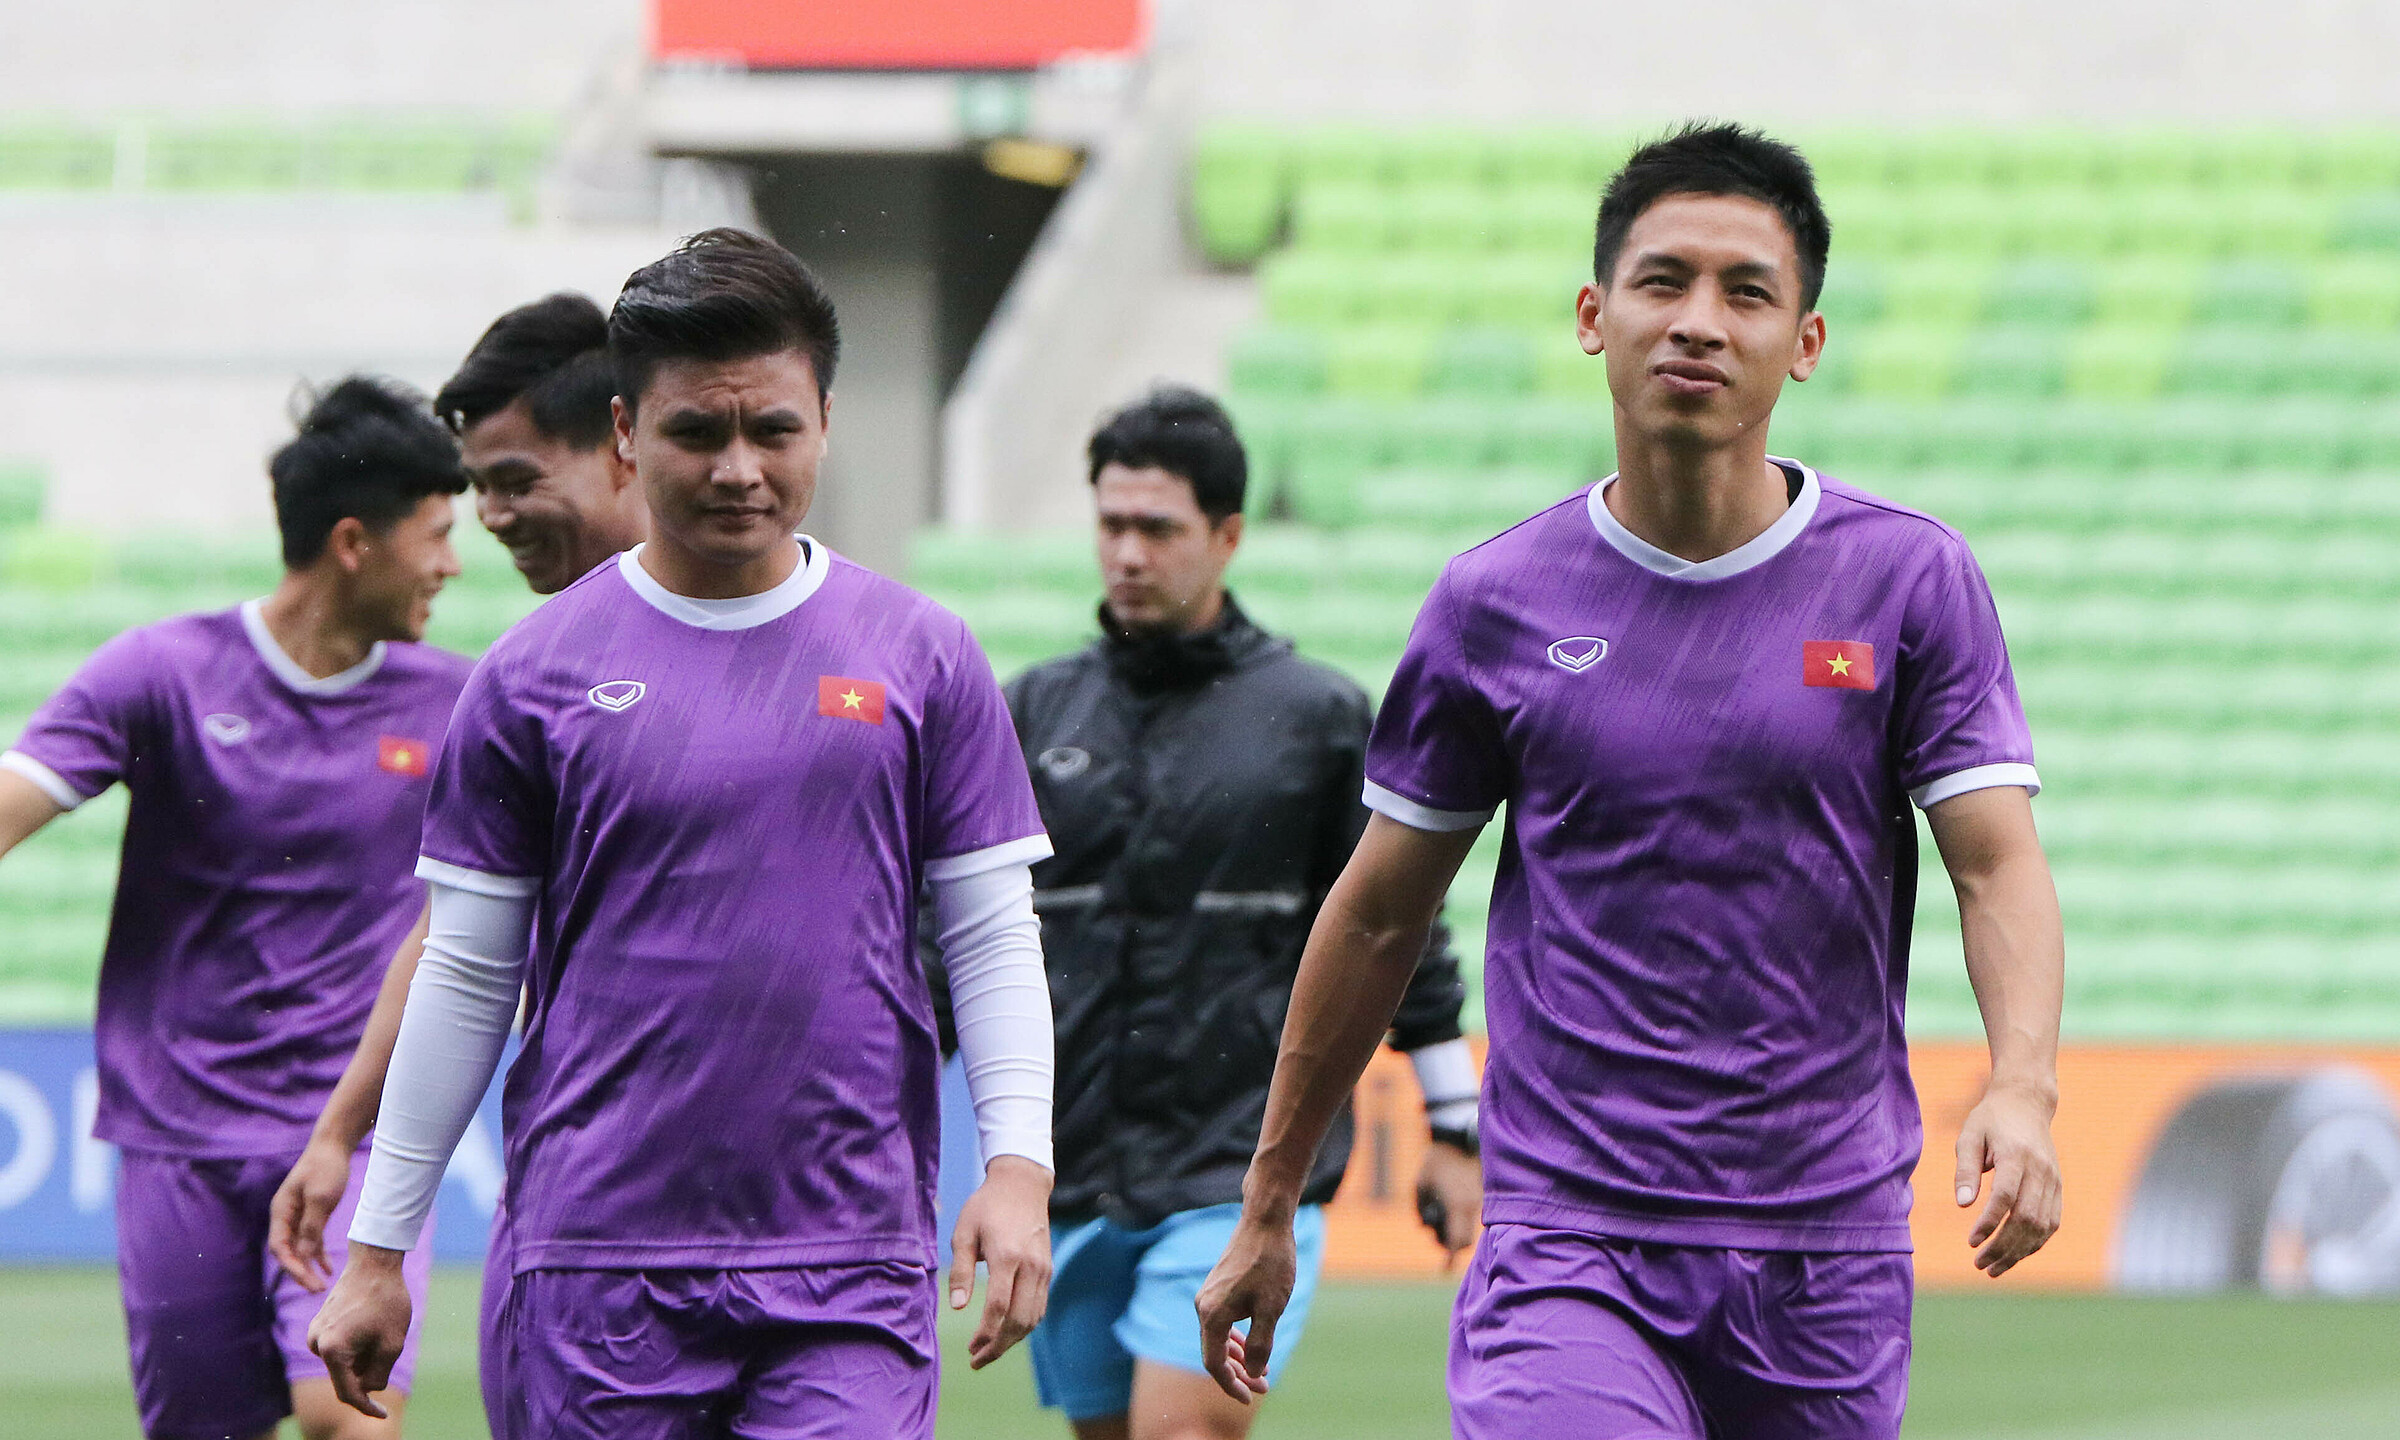 Vietnams new captain Do Hung Dung (R) will be playing his first game with the national team after suffering a shin bone fracture in a V. League match in March 2021. Photo by Vietnam Football Federation